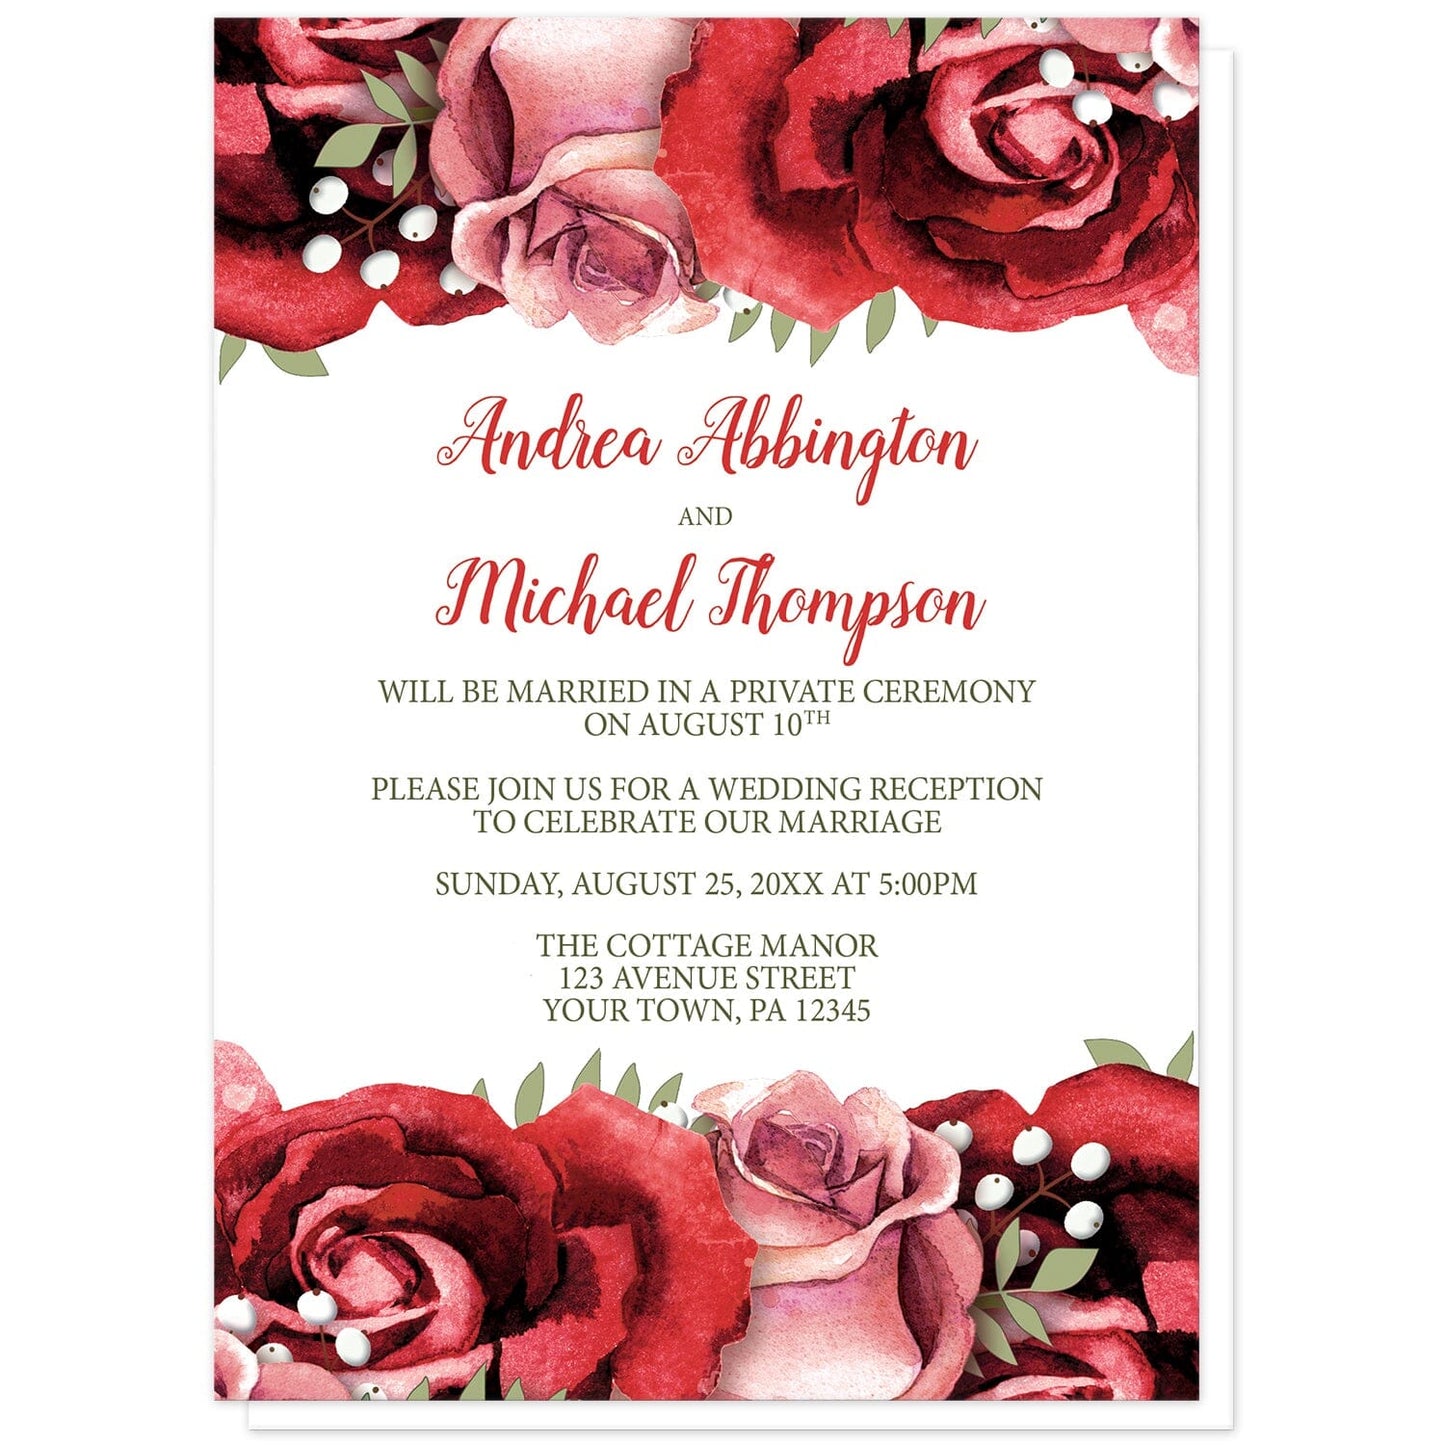 Rustic Red Pink Rose Green White Reception Only Invitations at Artistically Invited. Rustic red pink rose green white reception only invitations designed with beautiful red and pink roses along the top and the bottom. Your personalized post-wedding reception details are custom printed in red and green over a white background in the center between the roses.